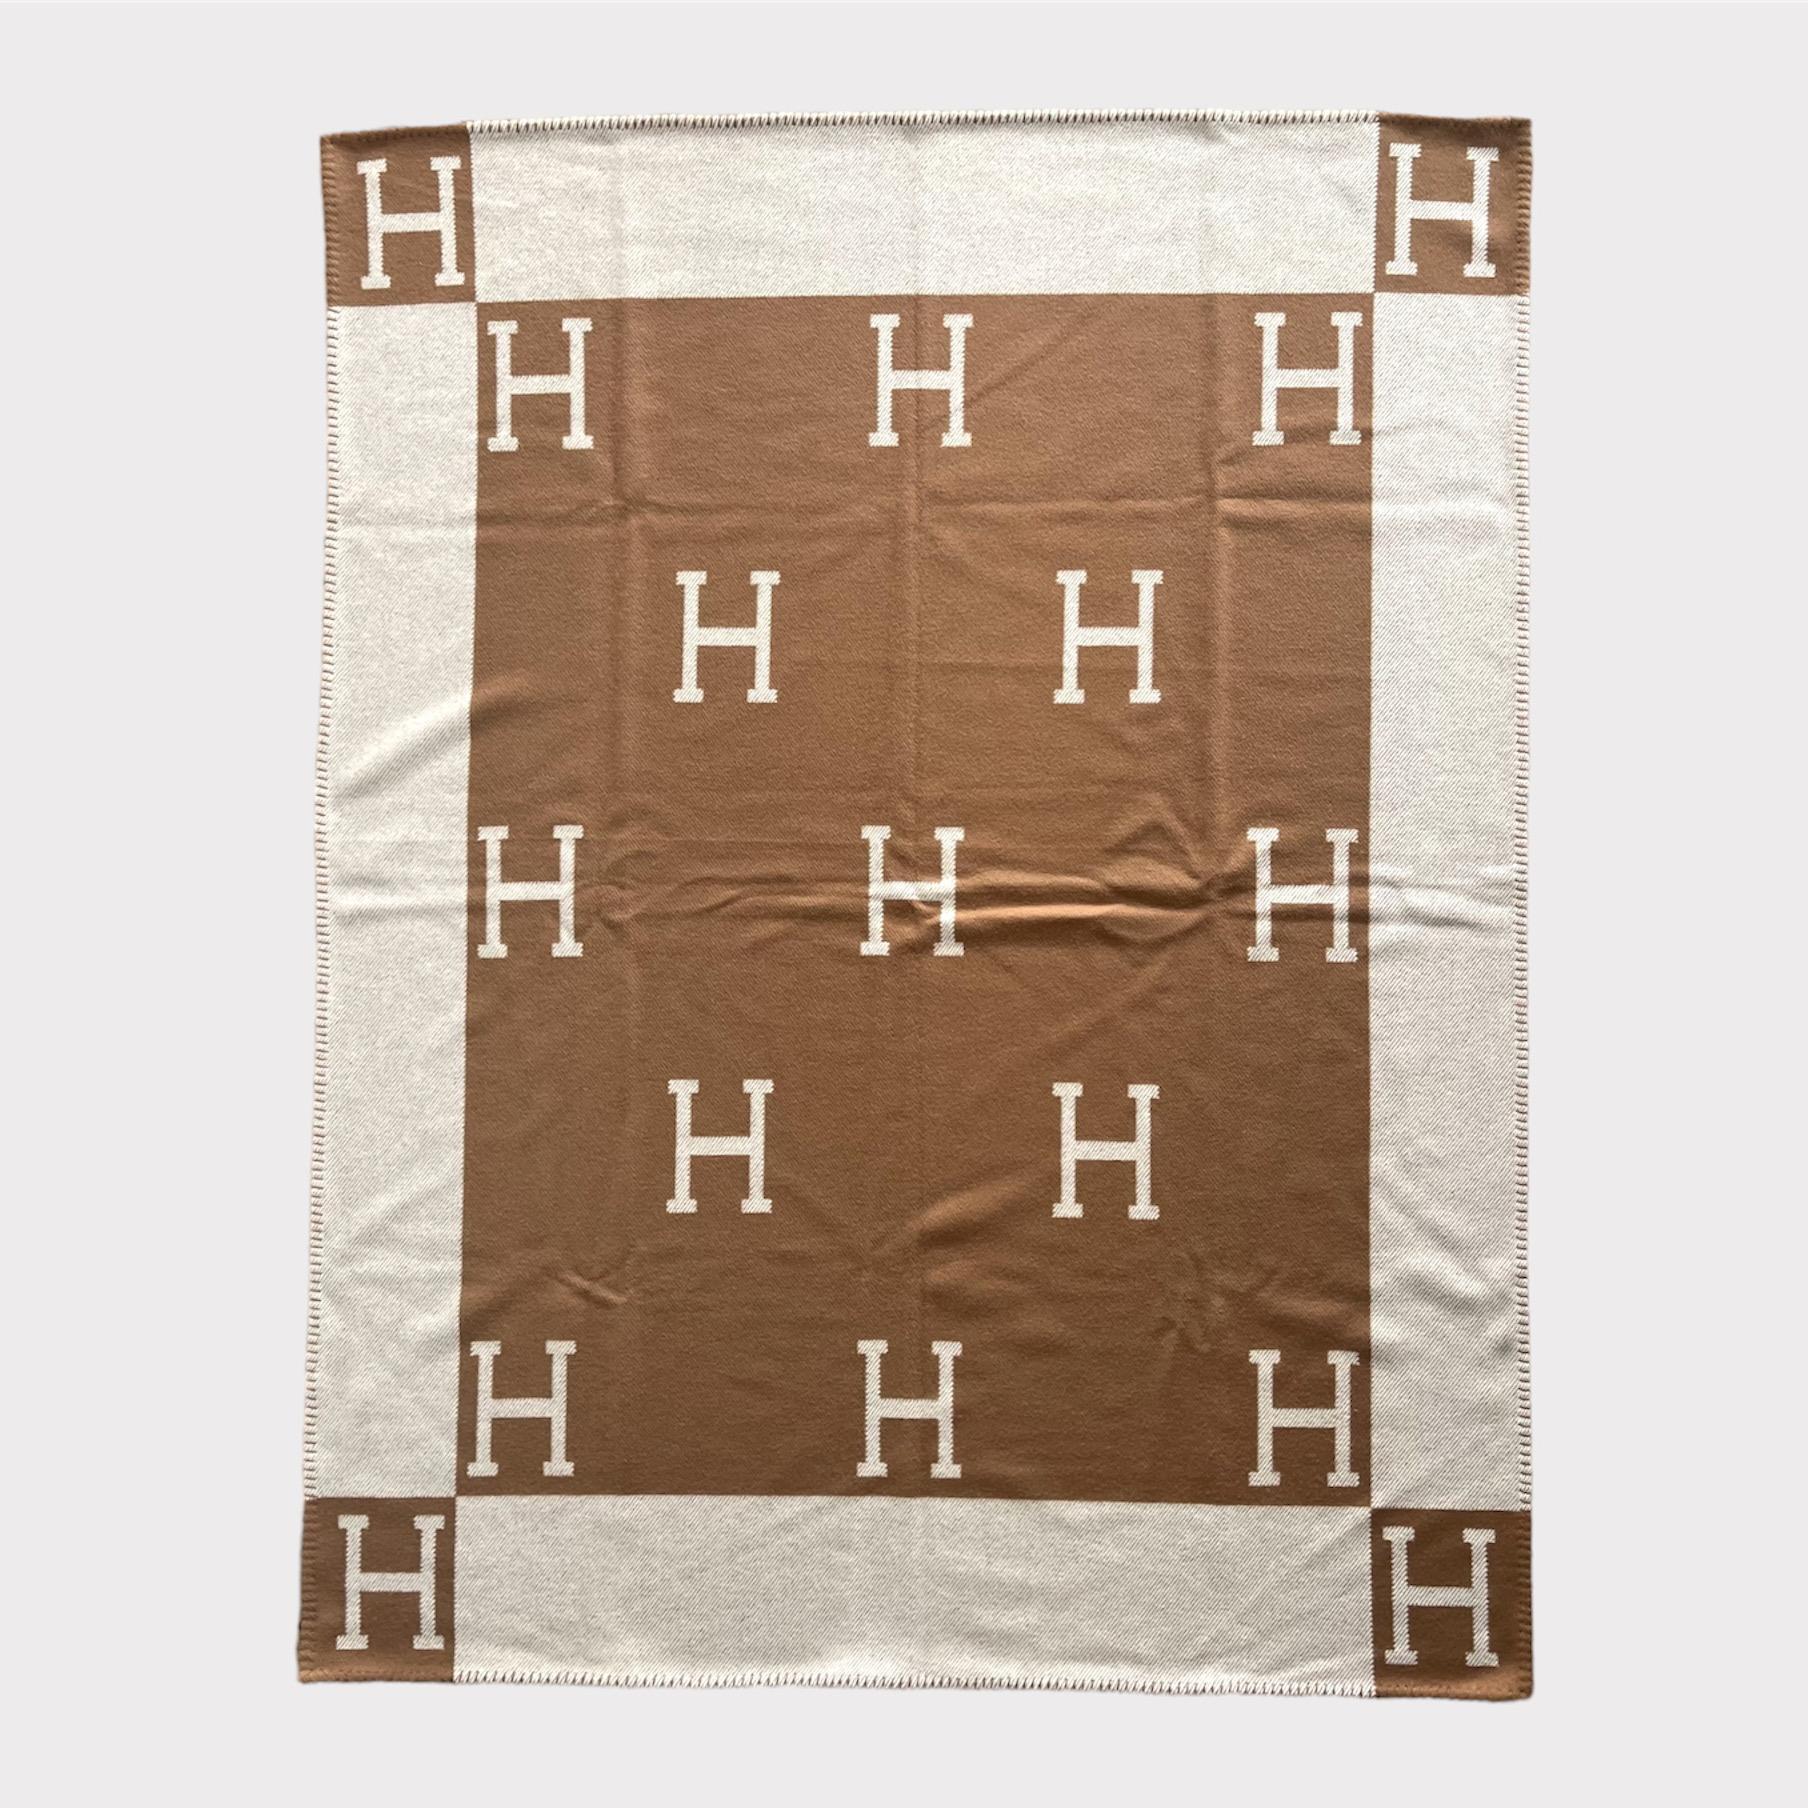 The Hermès Avalon Throw blanket is the iconic and highly sort after piece from the Hermes homeware collection. This blanket is made from 90% Merino Wool and 10% Cashmere making it warm and soft, perfect for a summer evening outside or a winter